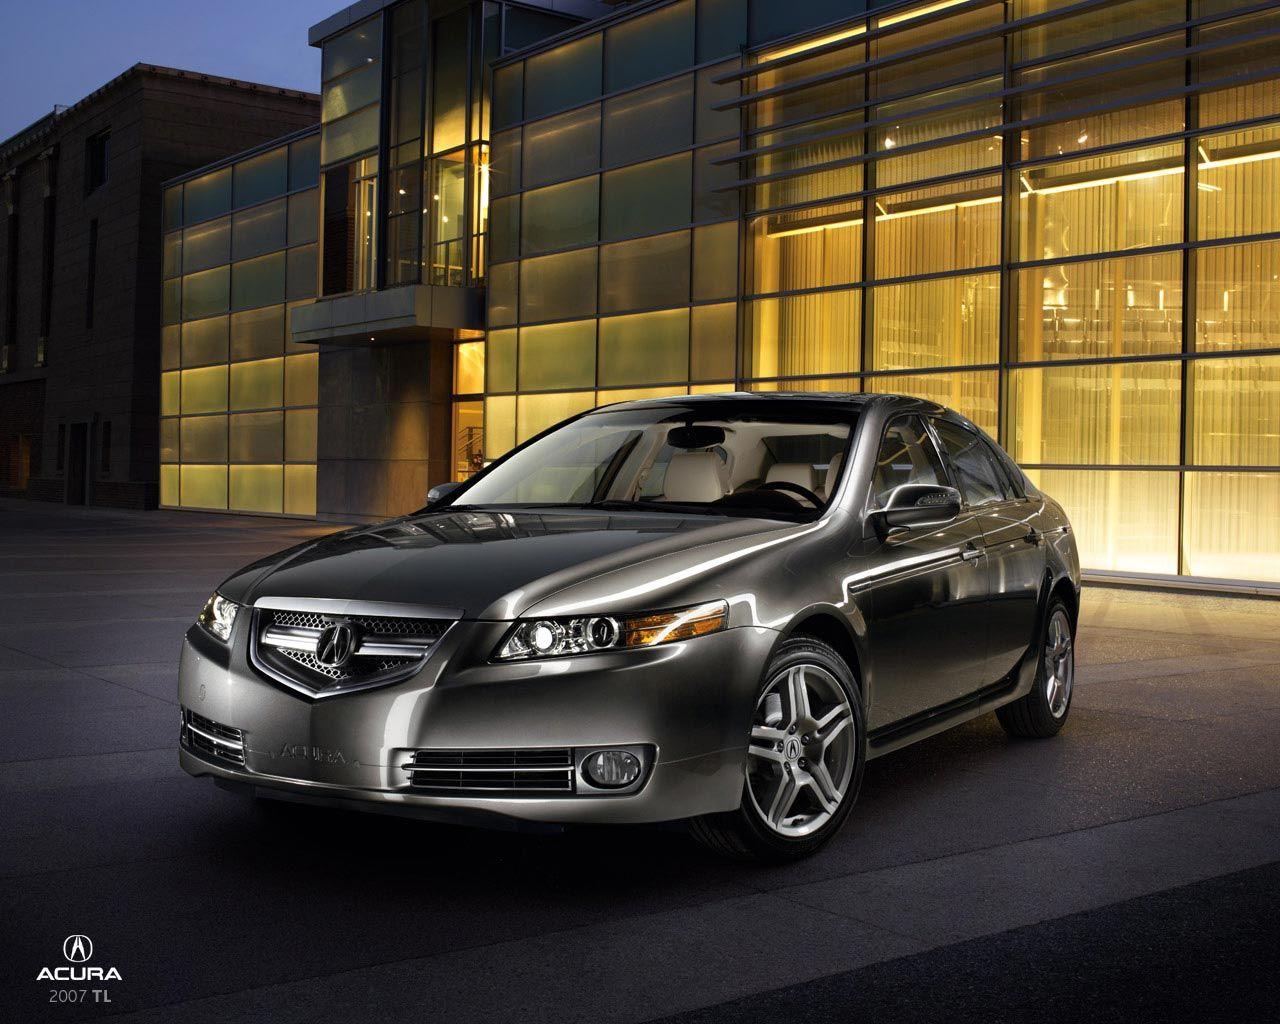 Free download Acura TL Wallpapers post at December ,